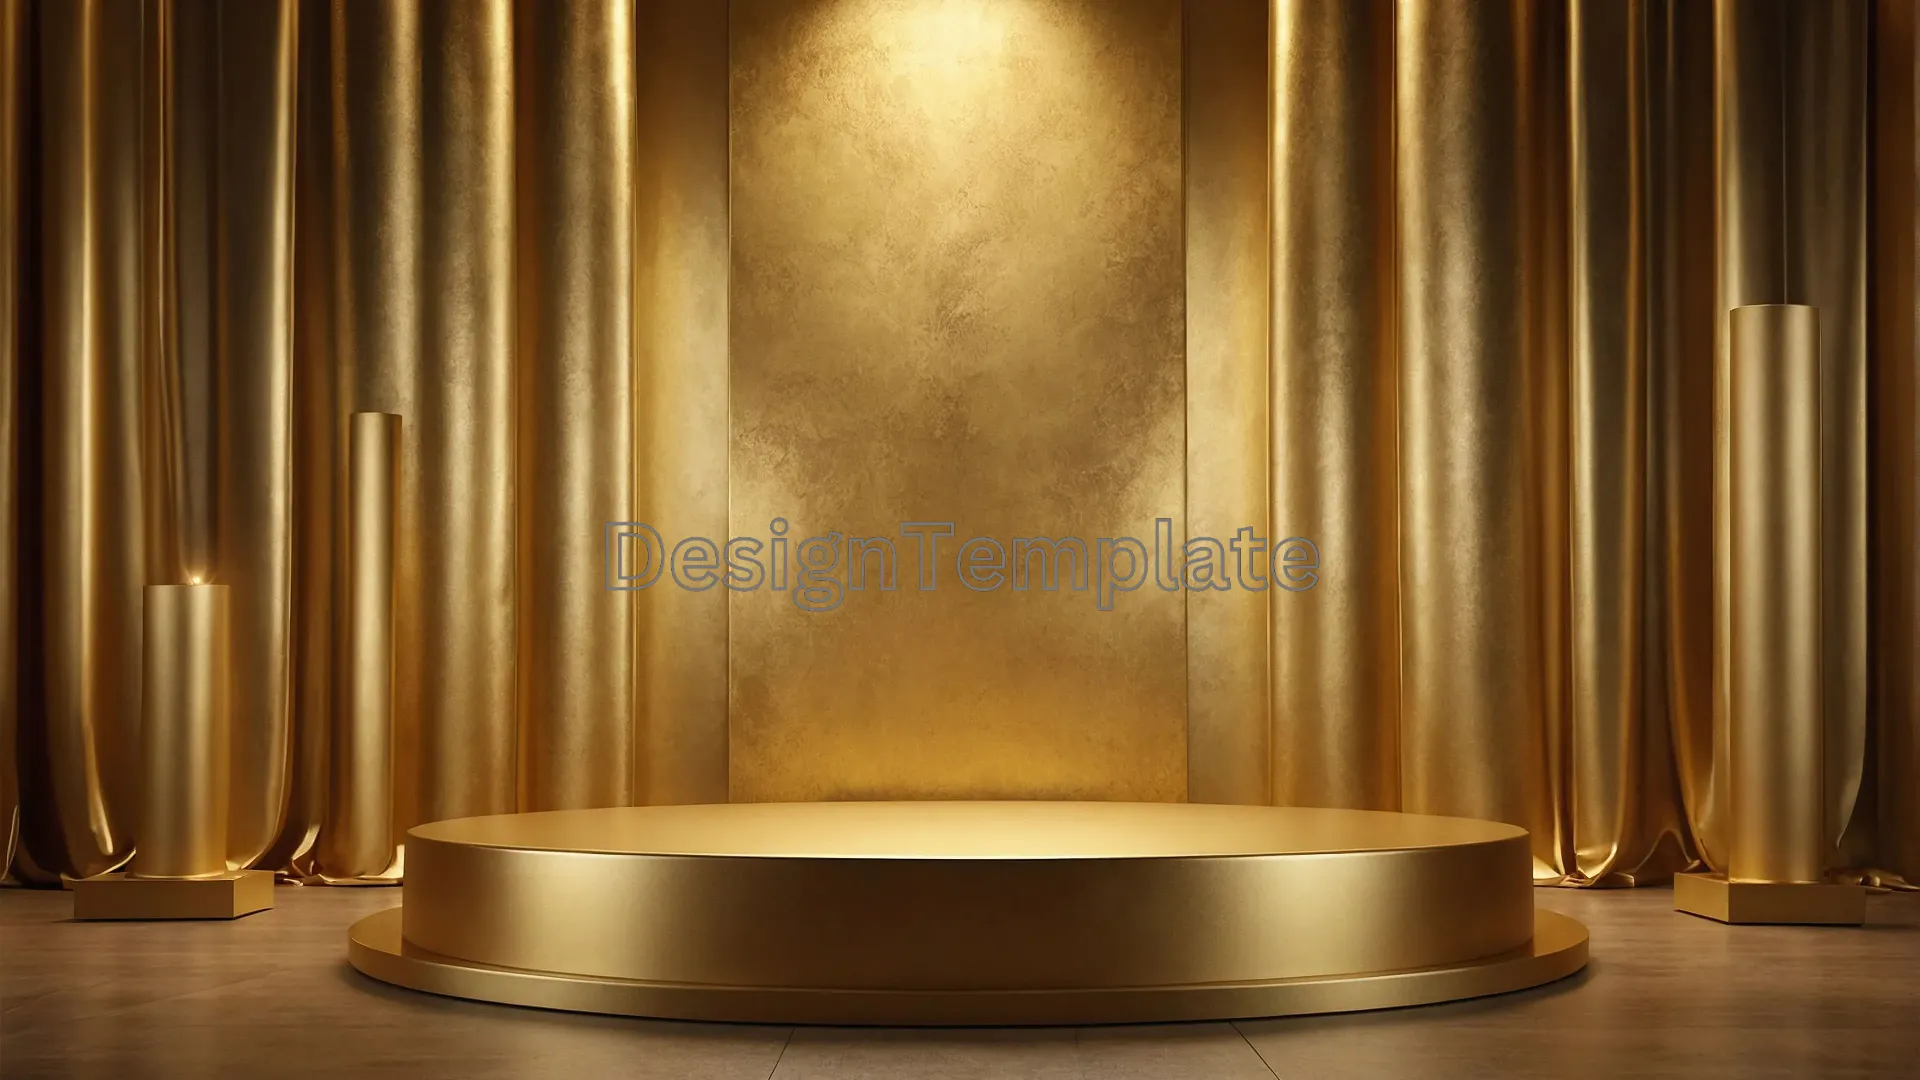 Elegant Golden Podium with Curtains for Award Show Background